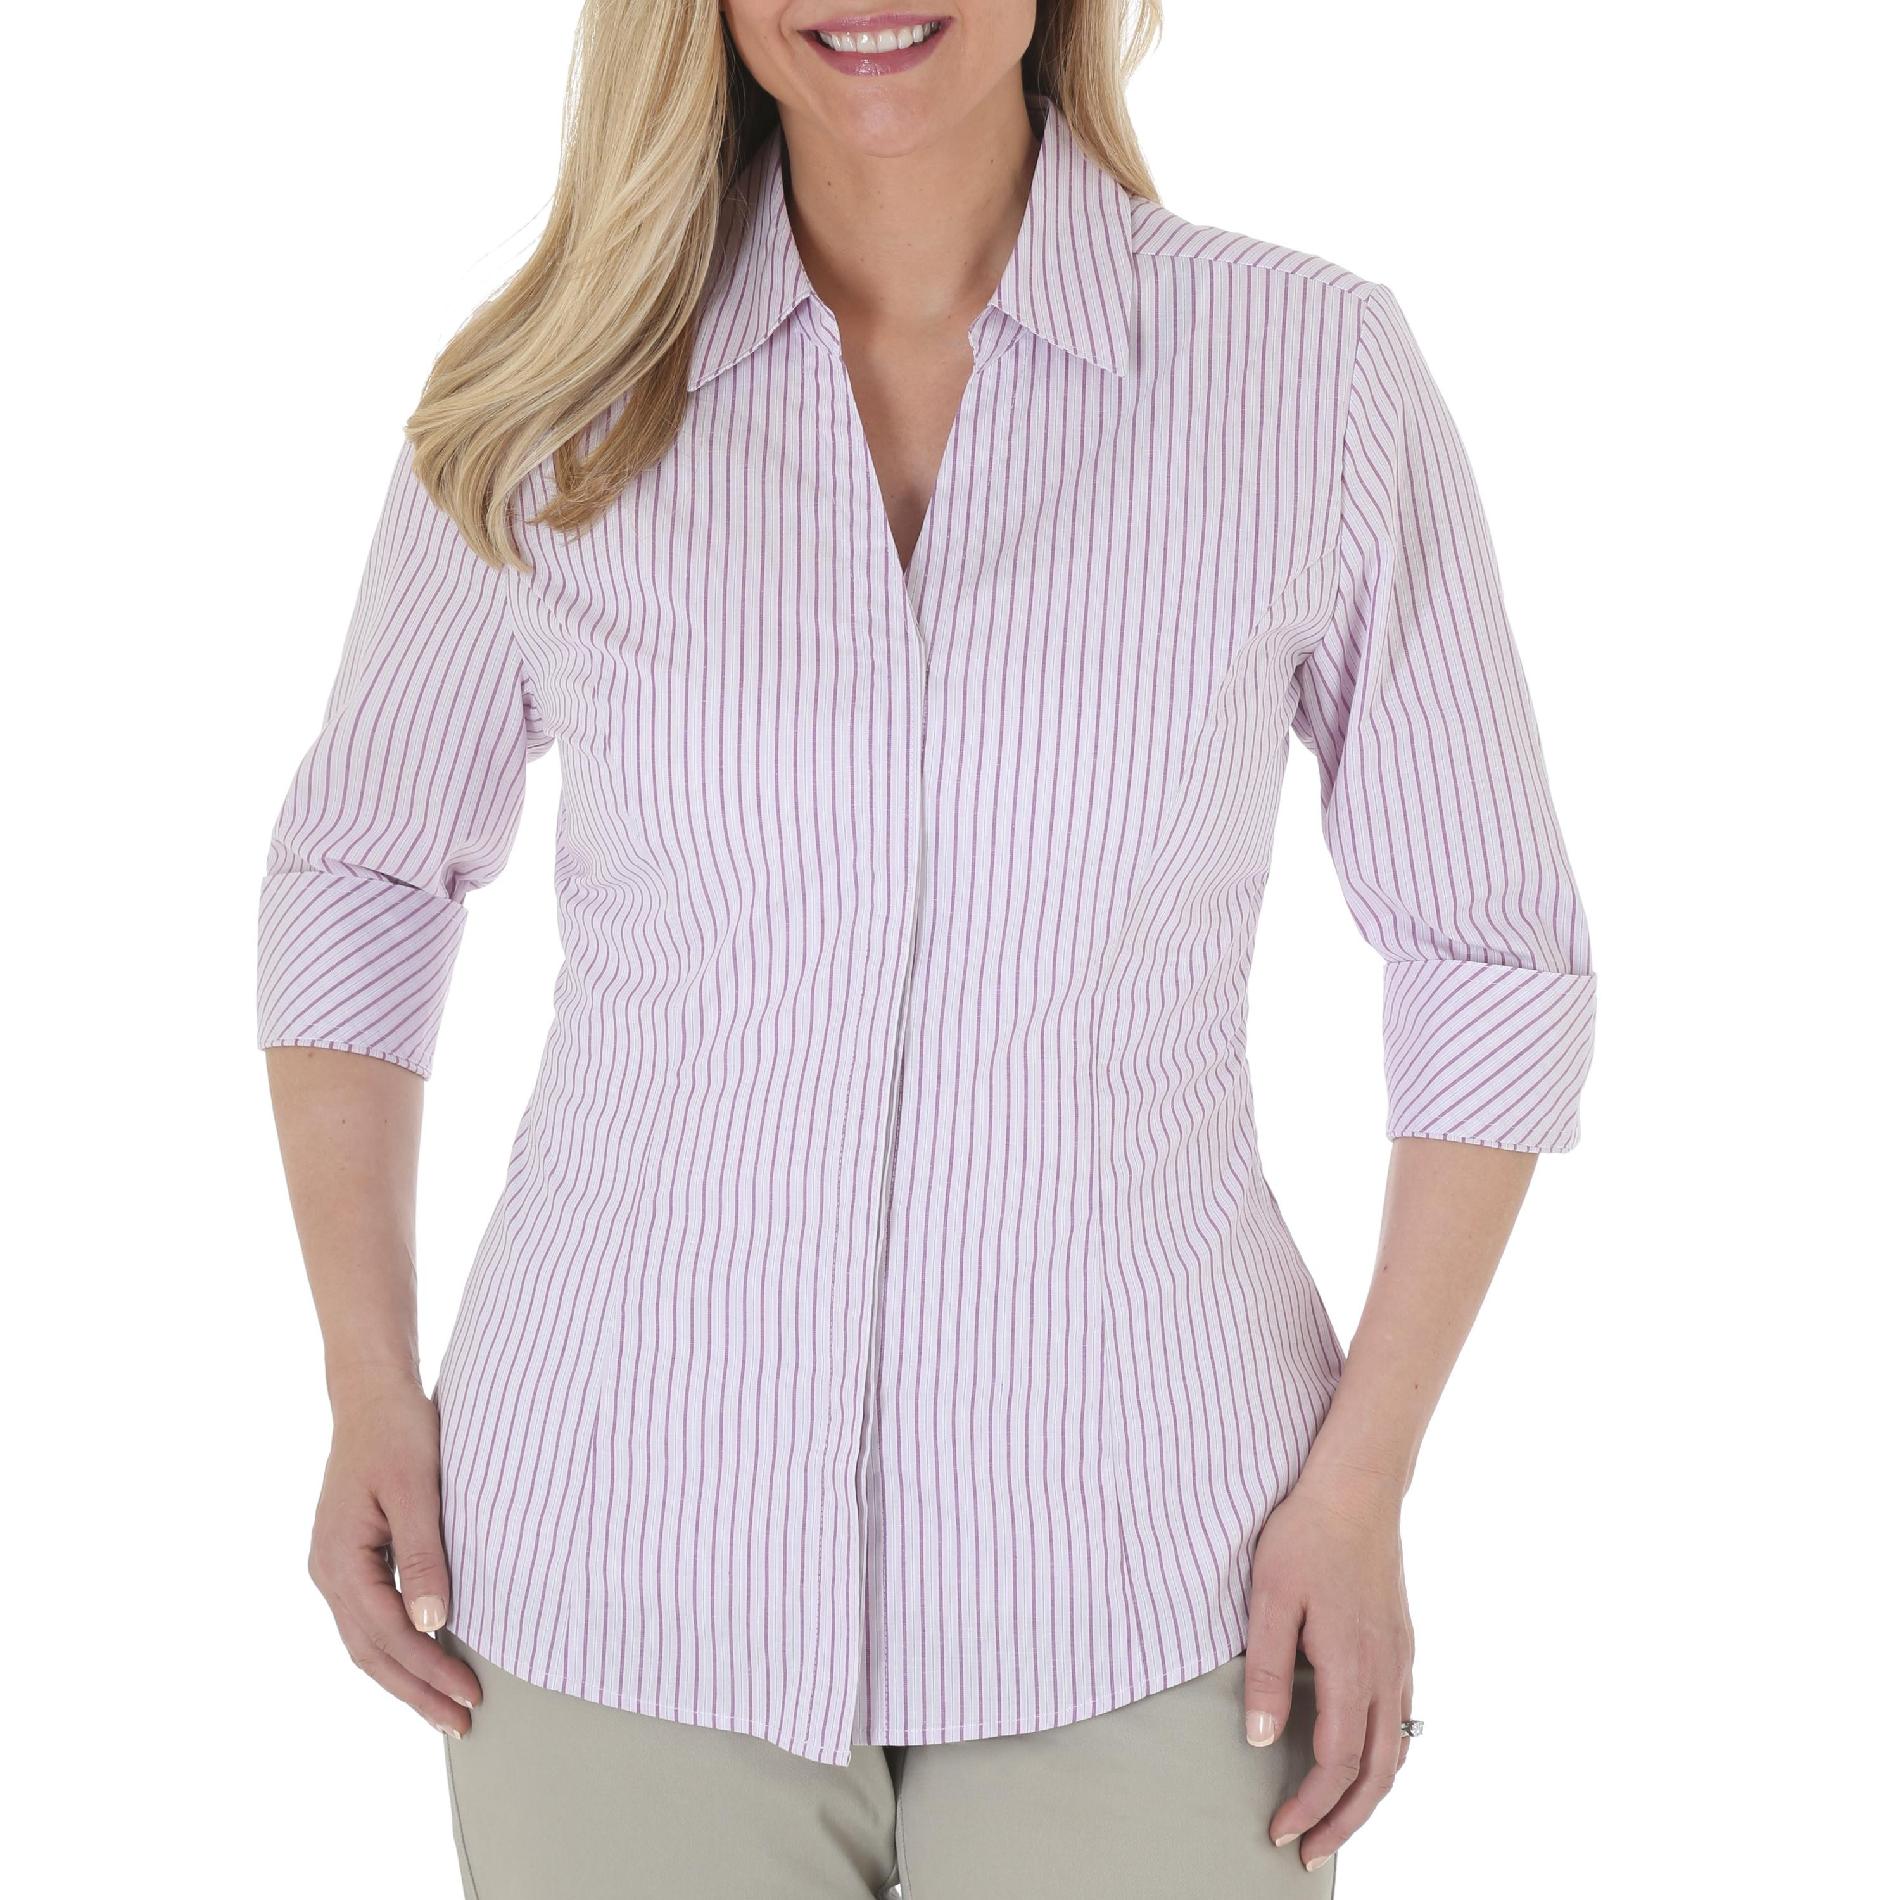 Riders by Lee Women's Woven Shirt - Striped